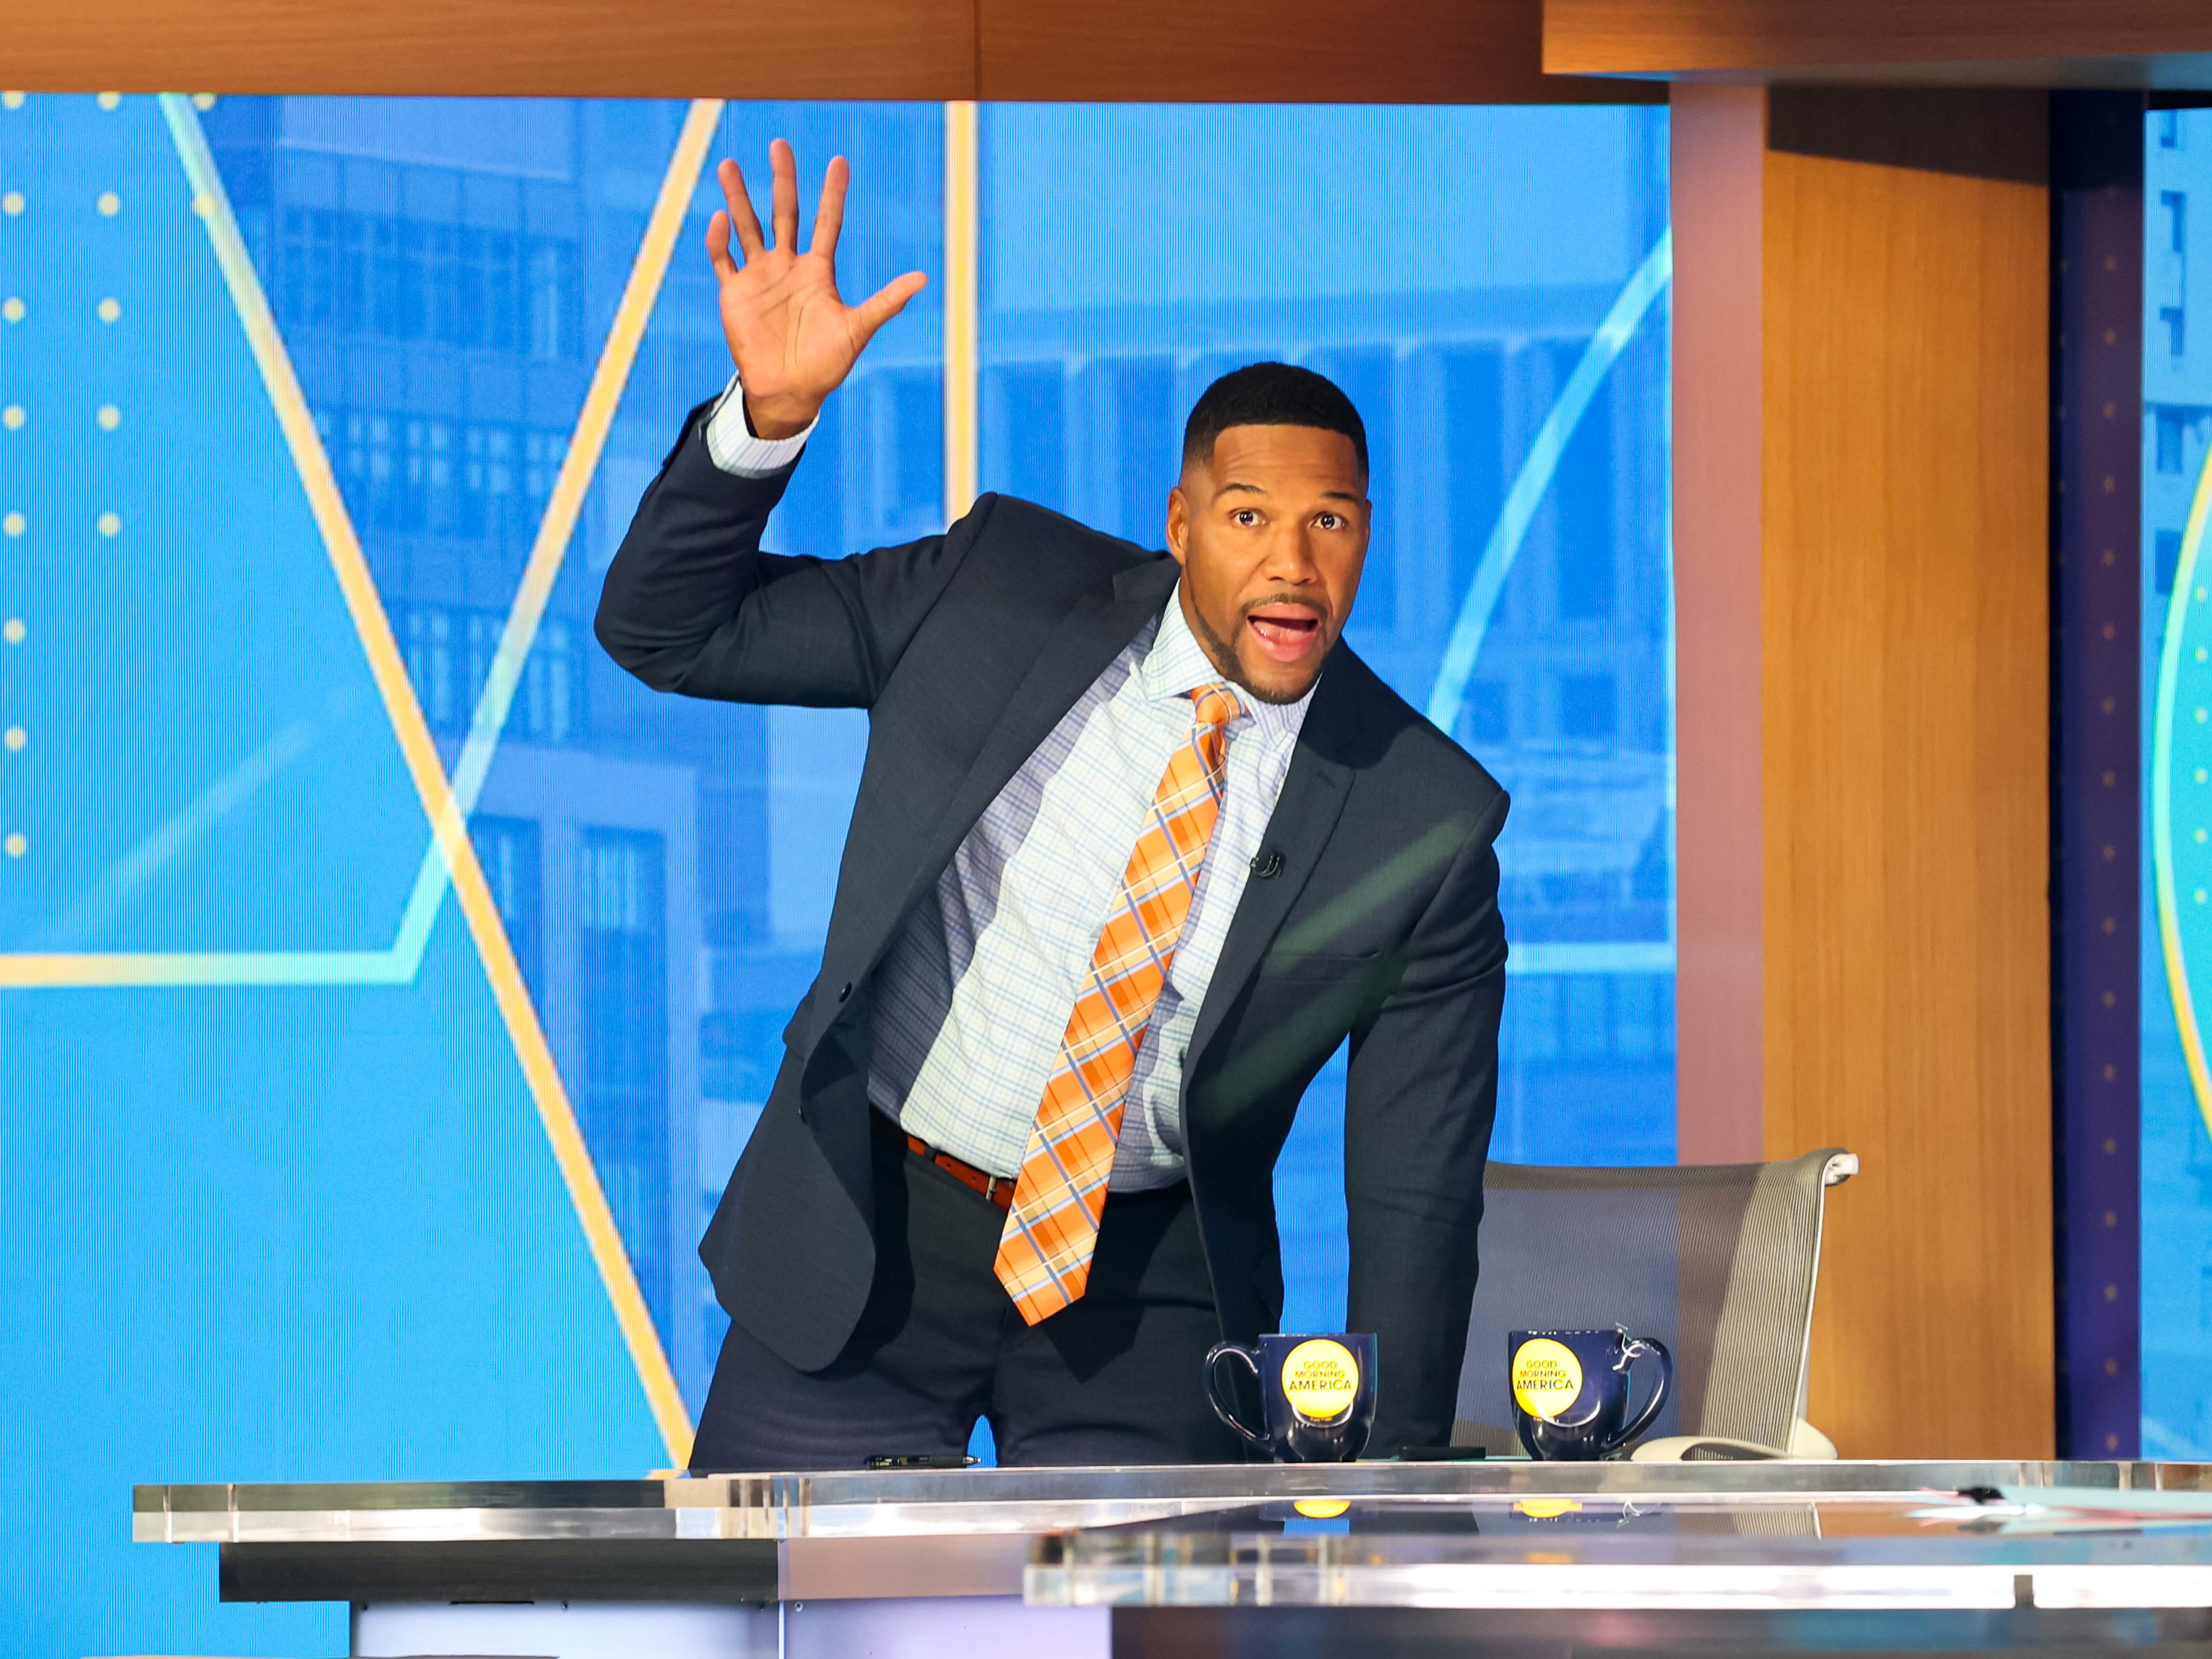 Michael Strahan to have number retired by New York Giants - Good Morning  America